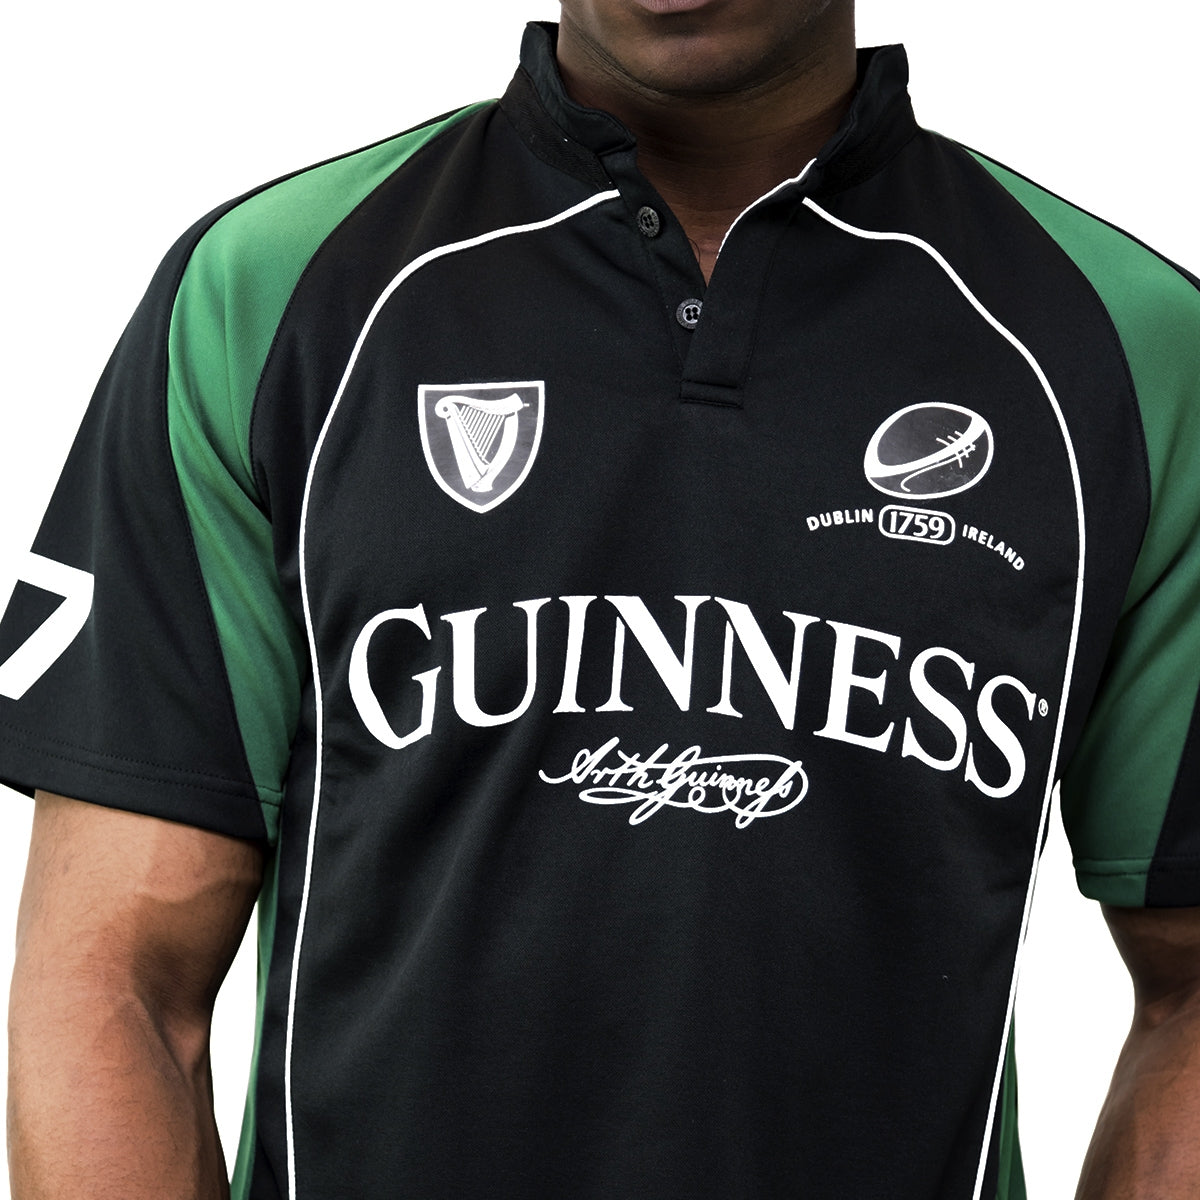 A man wearing a Guinness UK Black and Green Short sleeve performance Rugby Jersey.